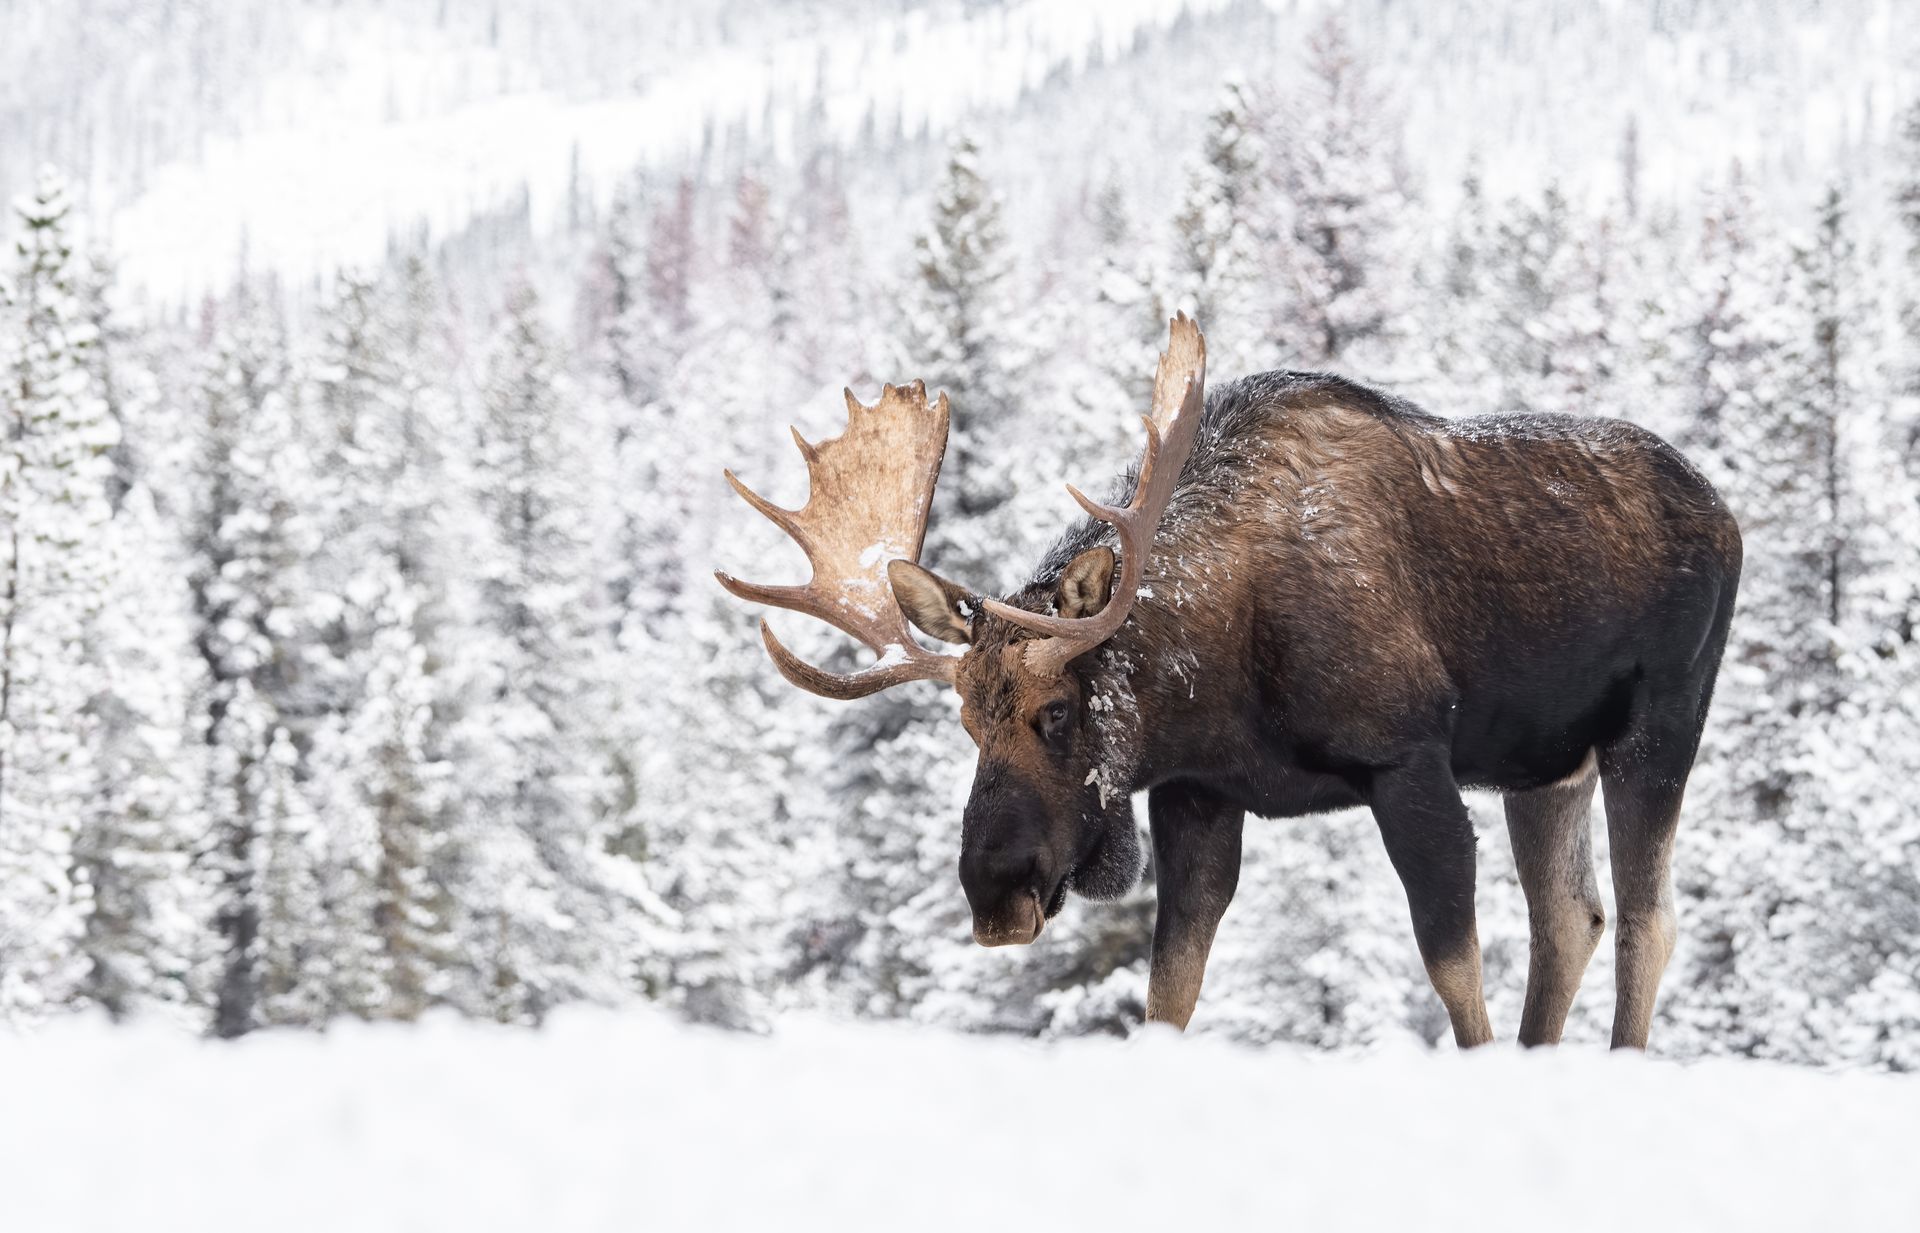 a moose is standing in the snow in the middle of a snowy forest .